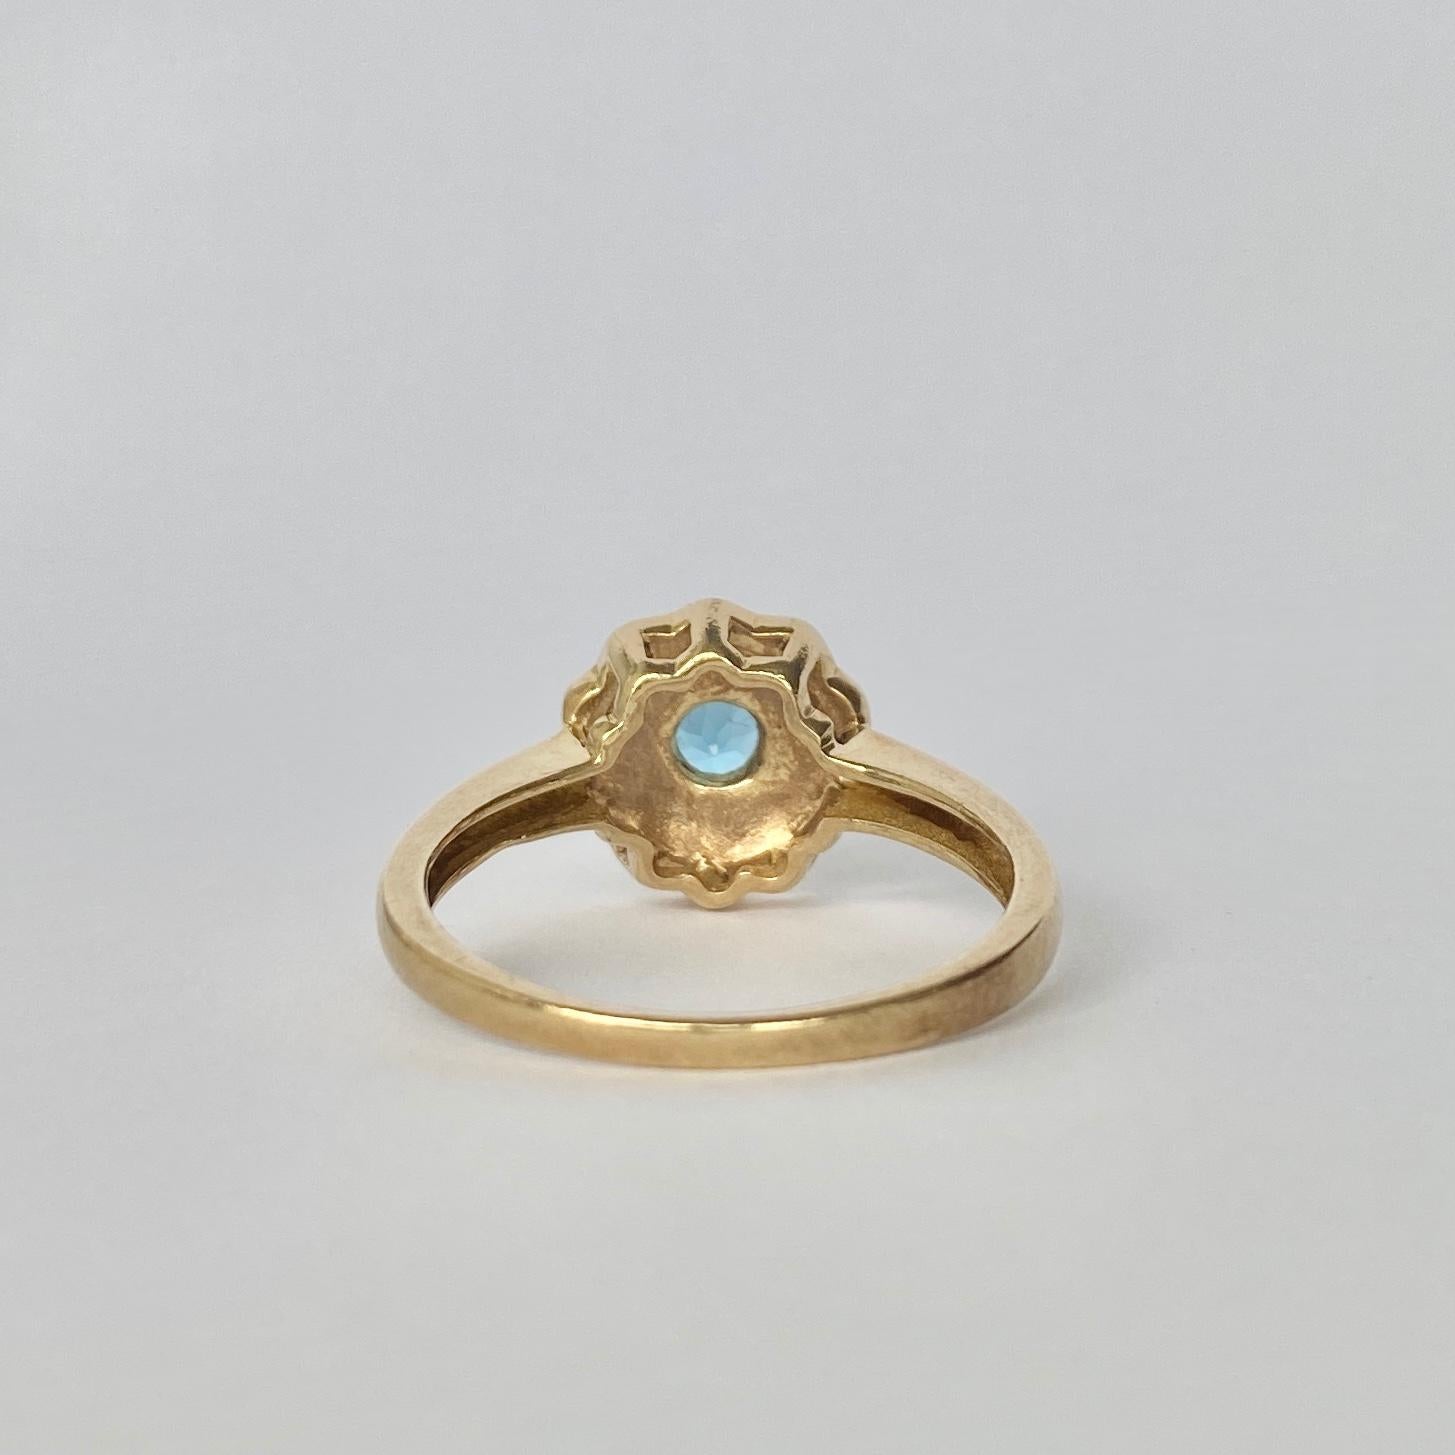 The blue of this topaz is bright and beautiful. It is complimented by the pale shimmer of the pearls surrounding it. The ring is modelled in 9ct gold. 

Ring Size: Q or 8 1/4 
Cluster Diameter: 10.5mm

Weight: 3.4g